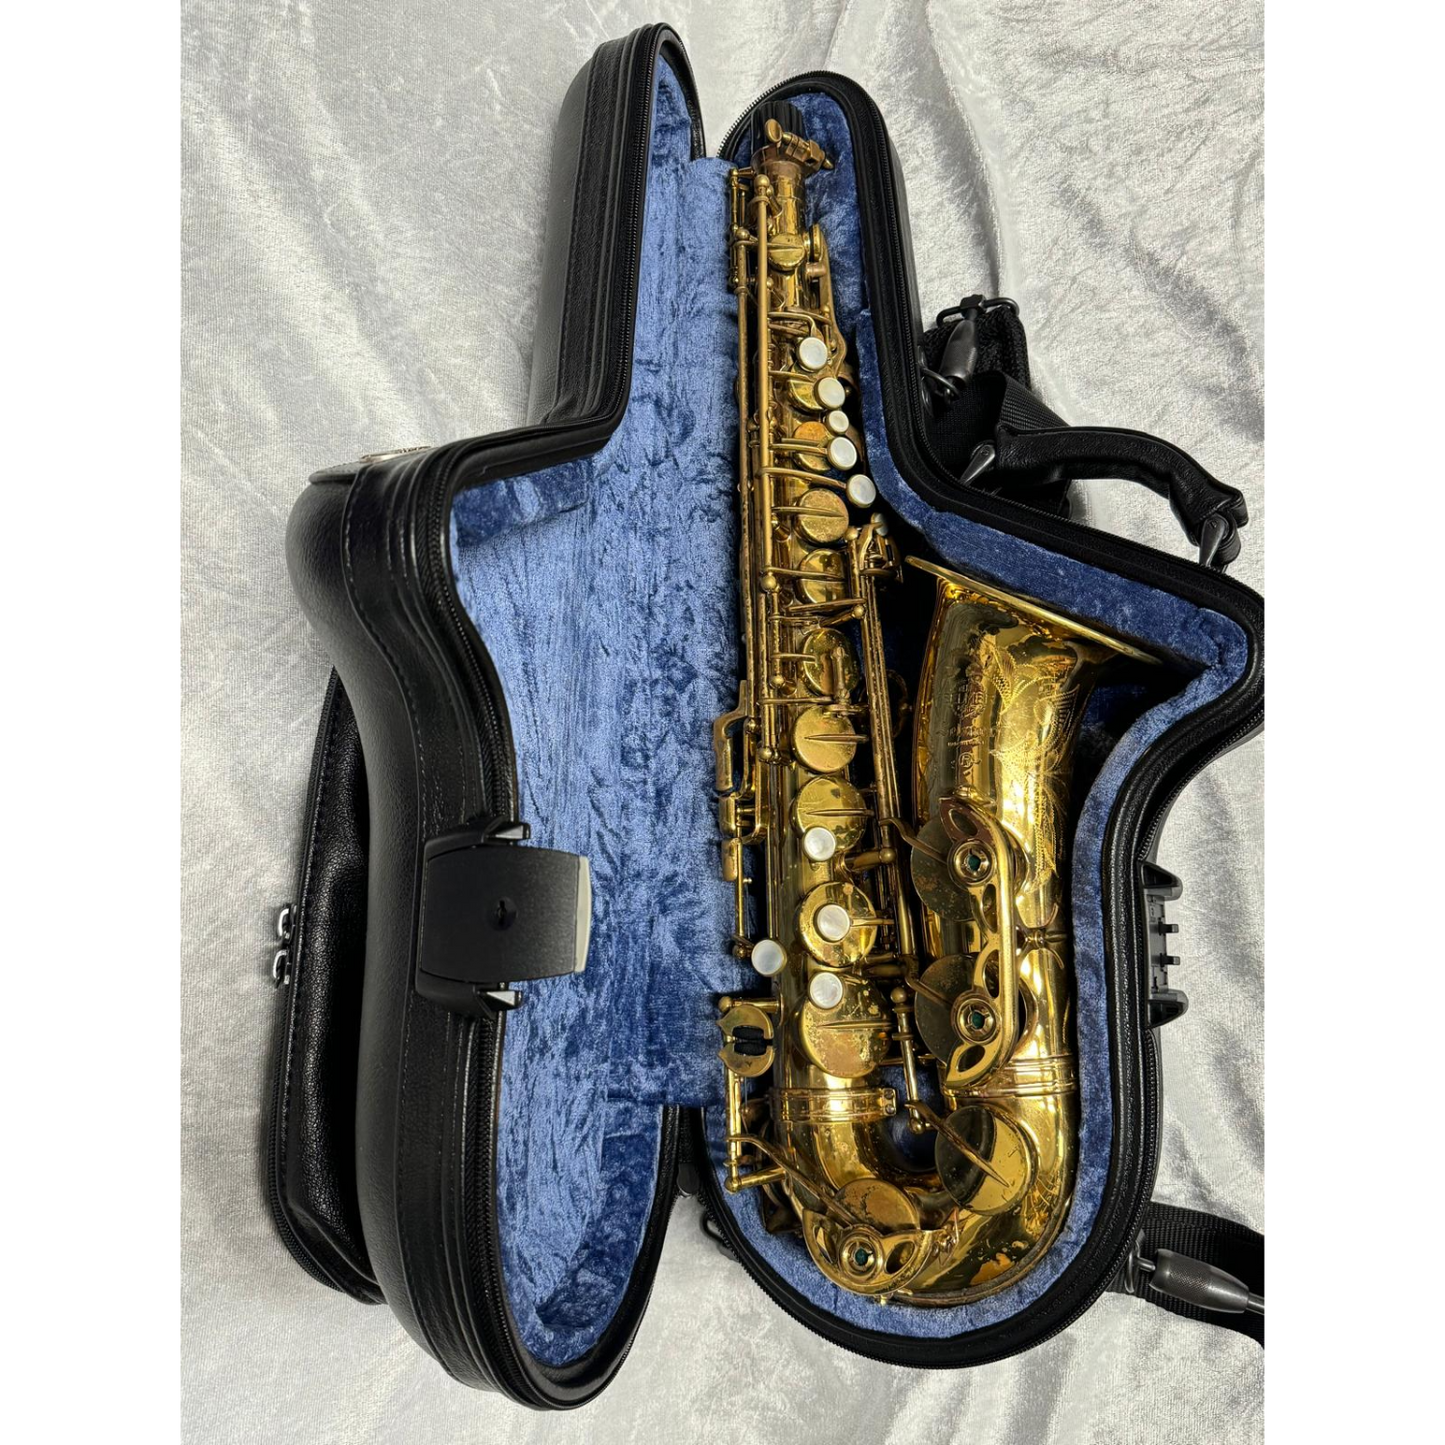 black leather case laying open with saxophone inside, blue interior, on white velvet background